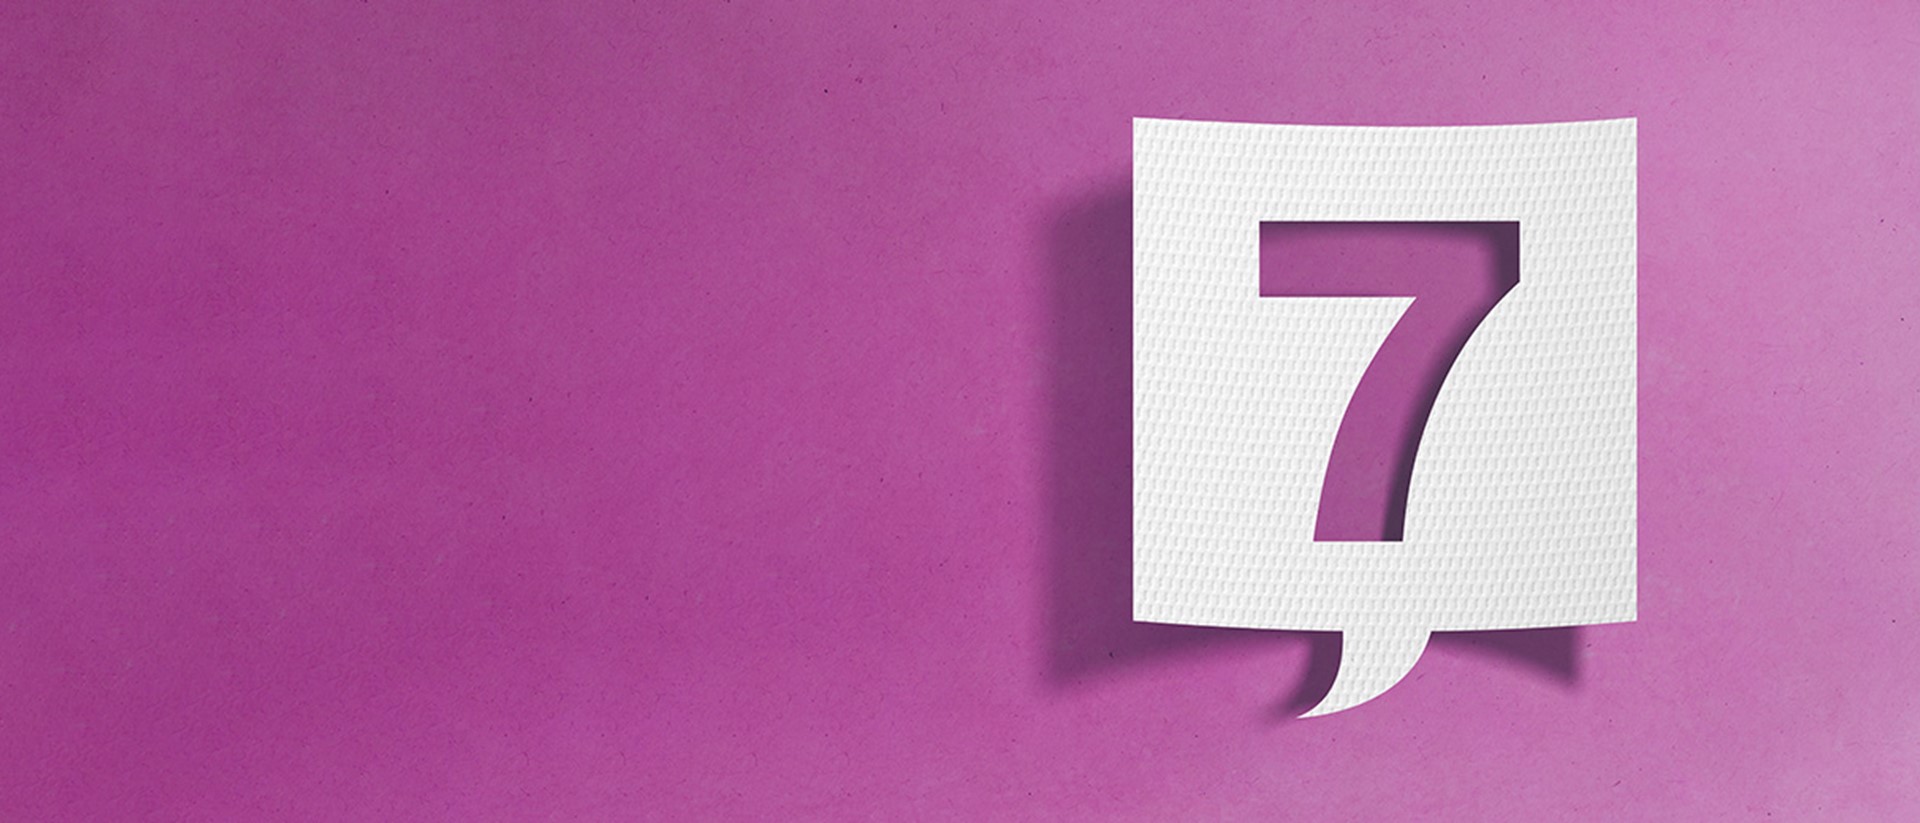 Image of a number 7 on a purple background